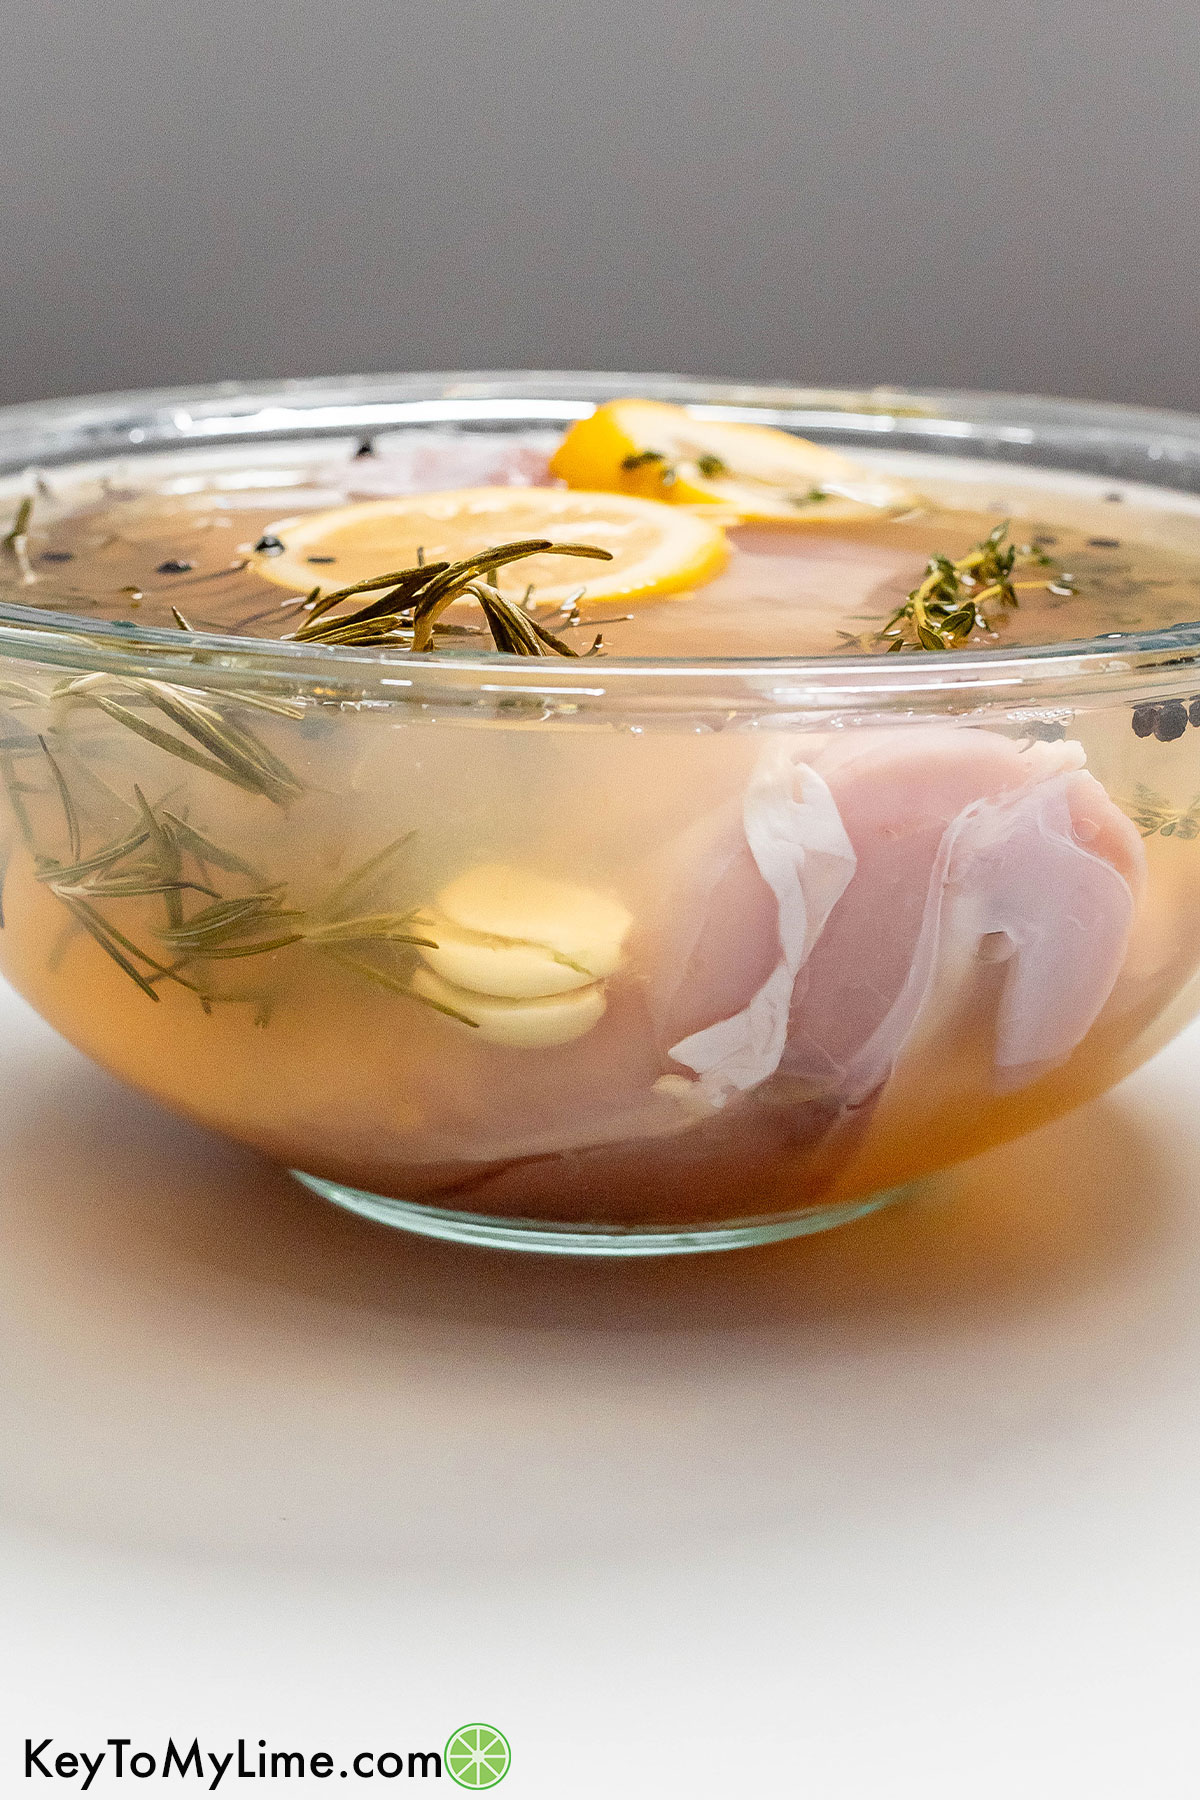 A side image of a turkey breast in brine with garlic, lemon wedges, and fresh herbs throughout in a large bowl.